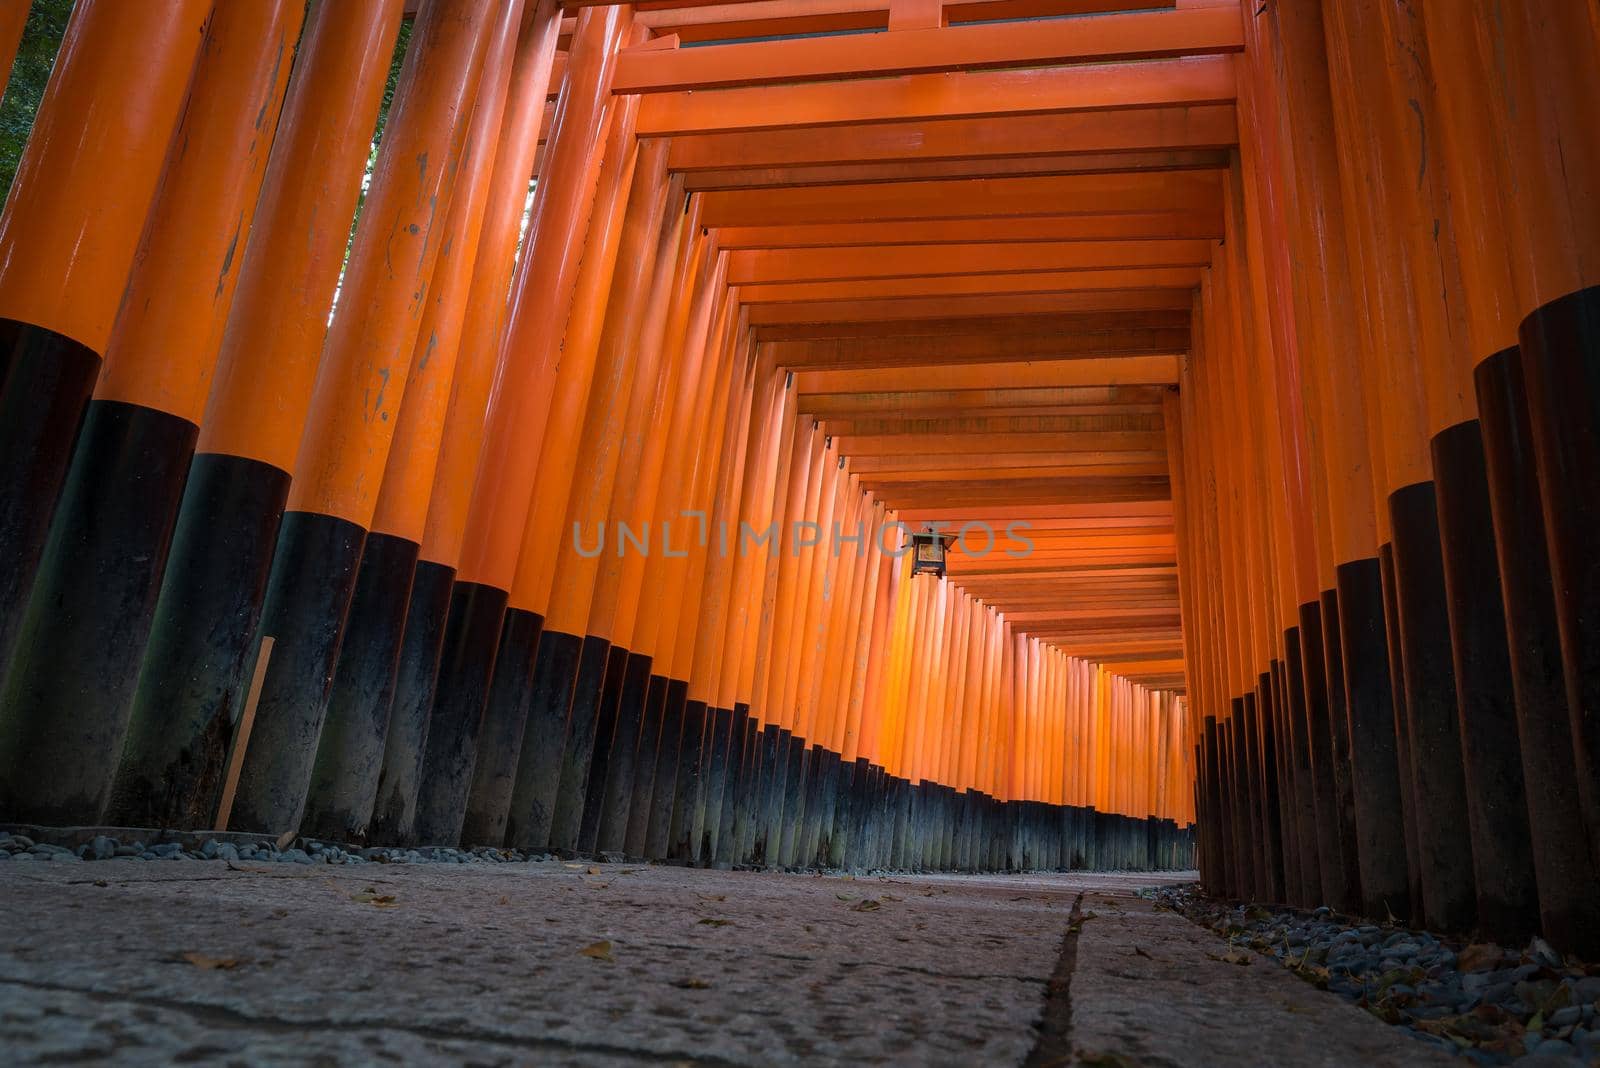 The red torii gates walkway path at fushimi inari taisha shrine the one of attraction  landmarks for tourist in Kyoto, Japan. by Nuamfolio